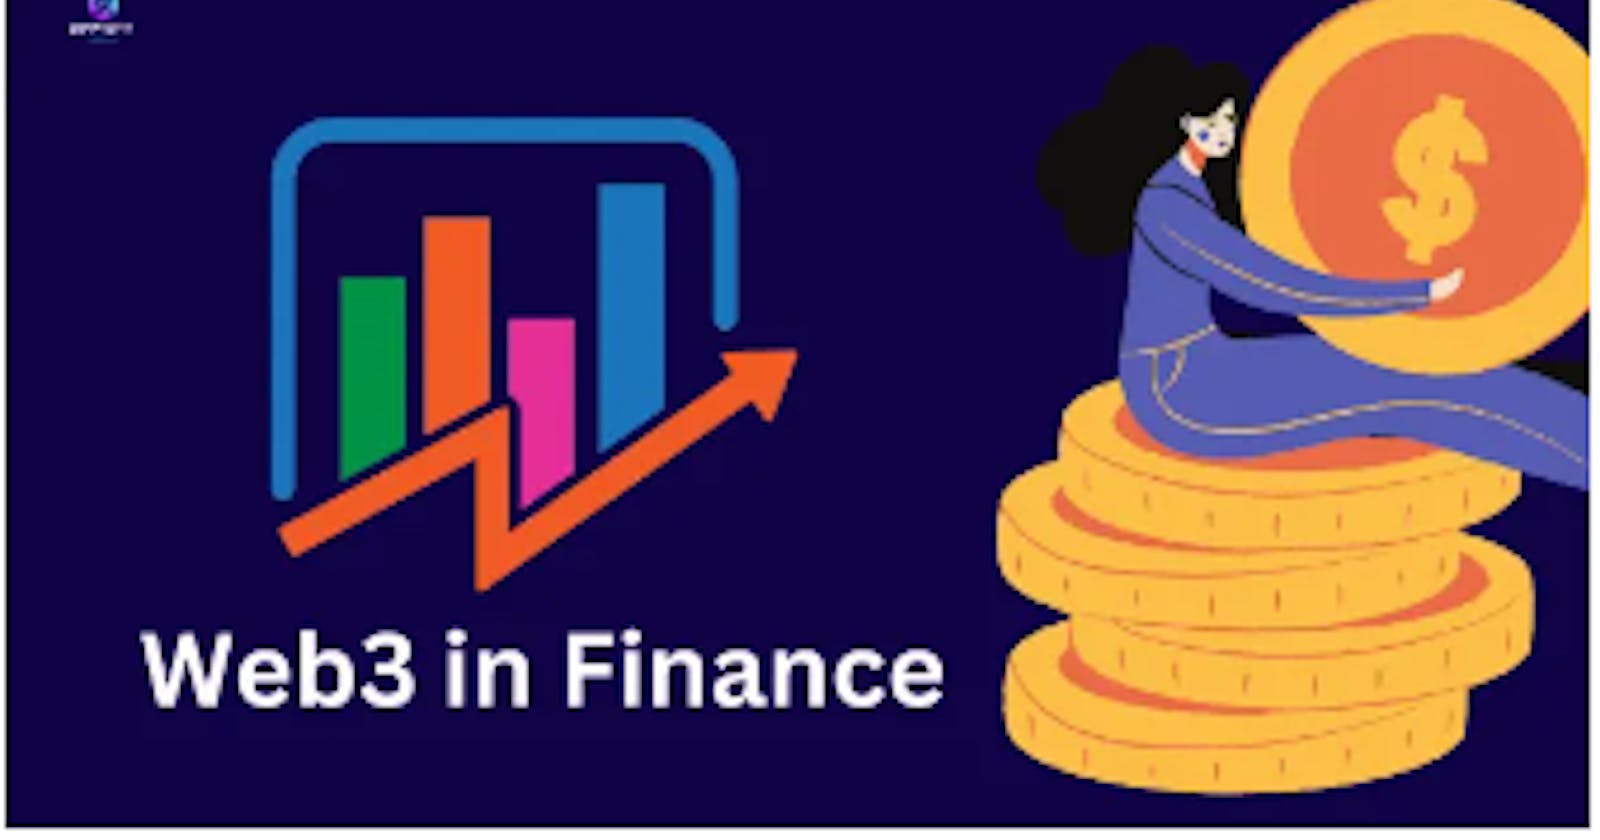 Web3 in Finance and the future of Financial services